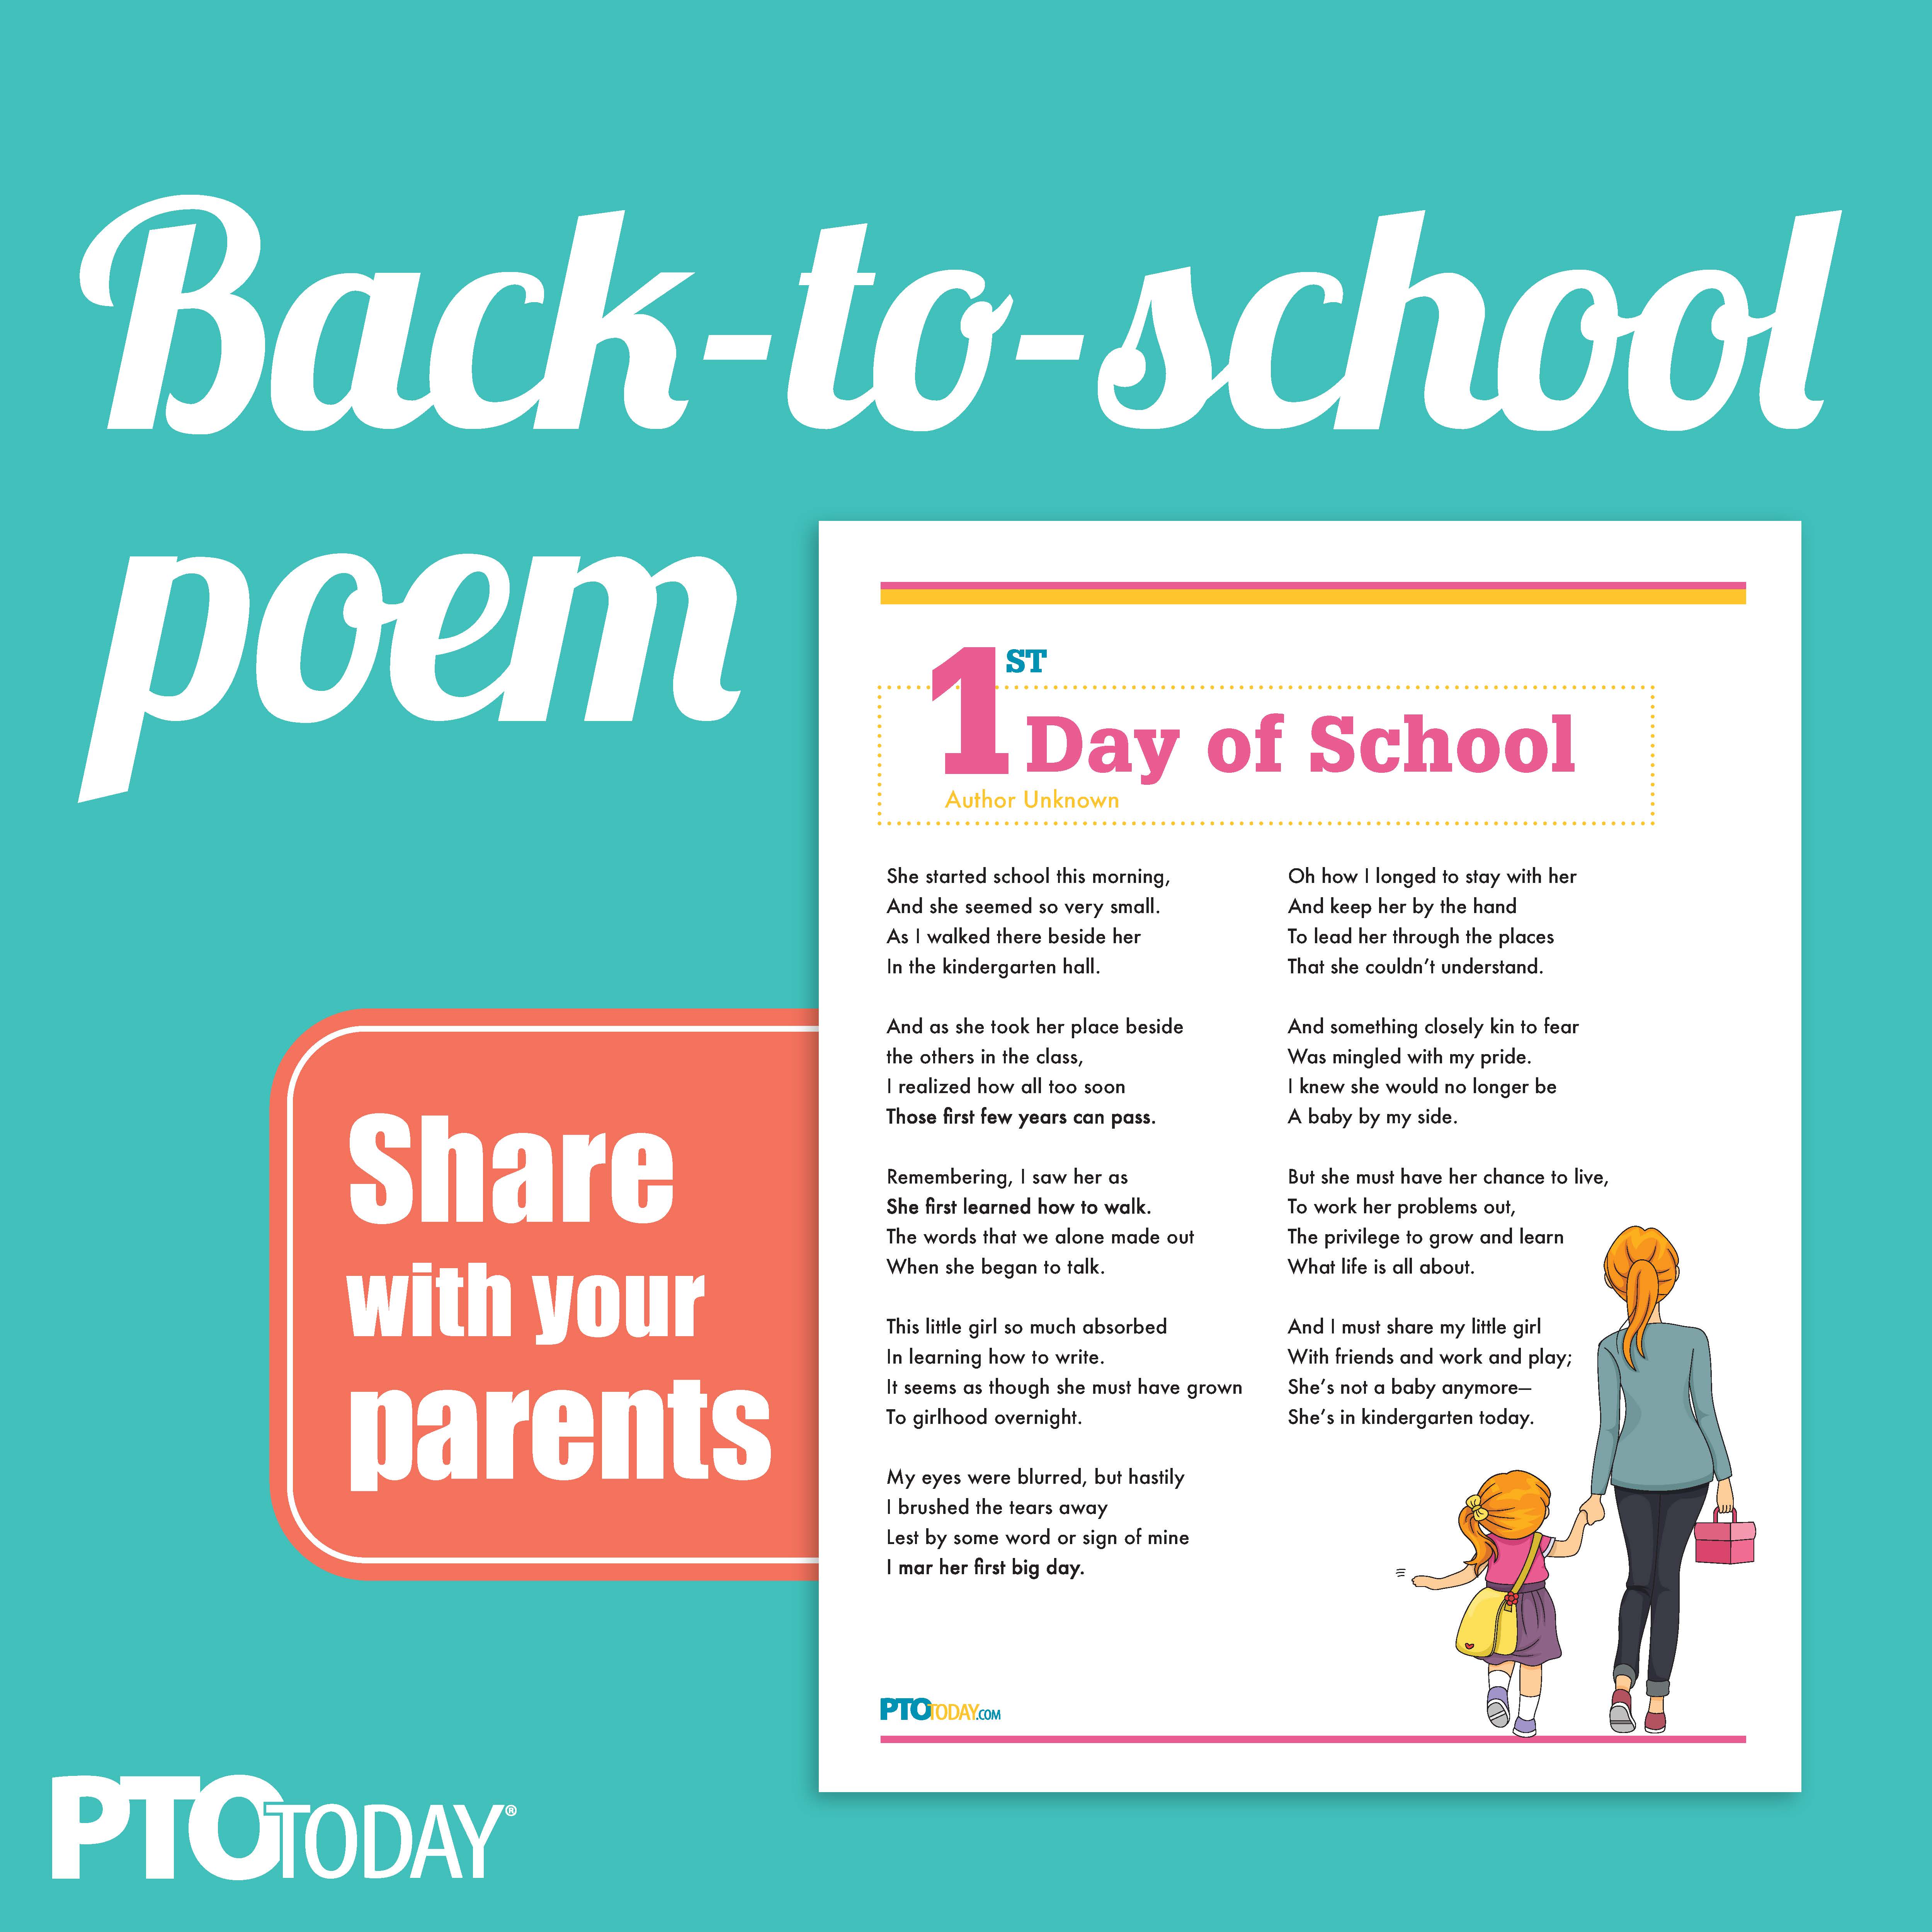 Download the 1st Day of School Poem